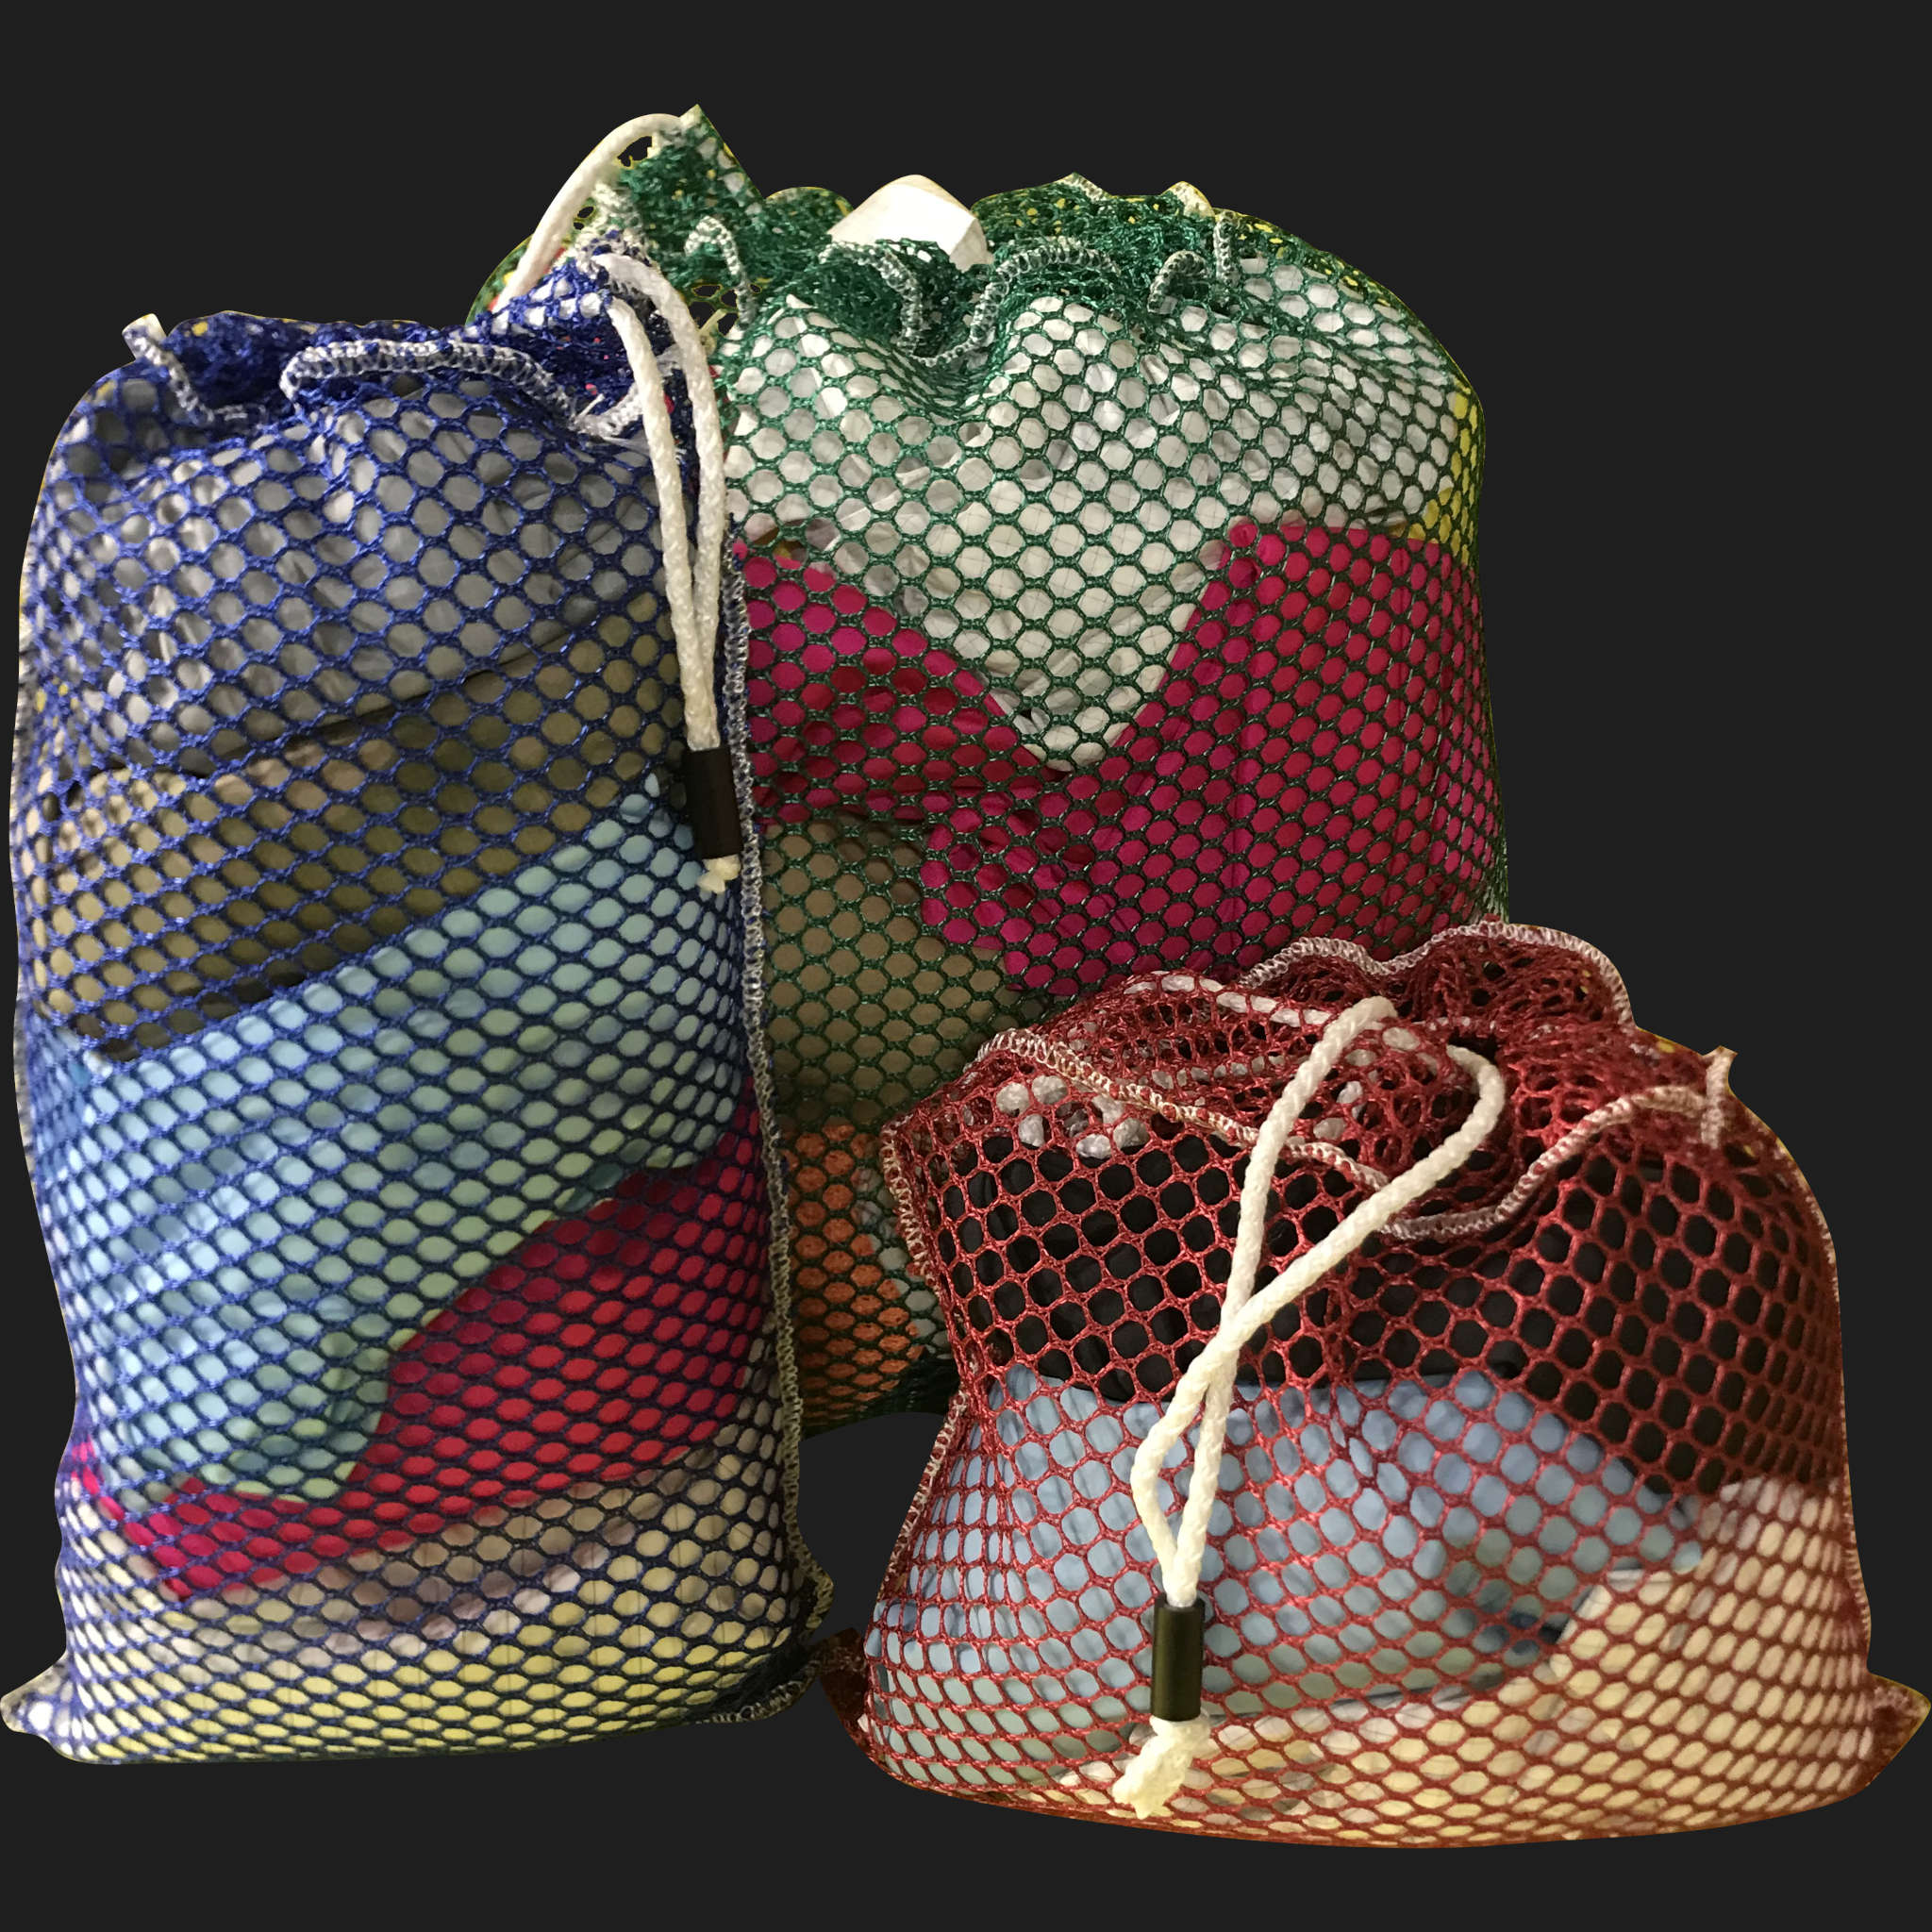 40" x 54" Customized Mesh-Net-Laundry Bags Heavy Duty with Cord and barrellock closure